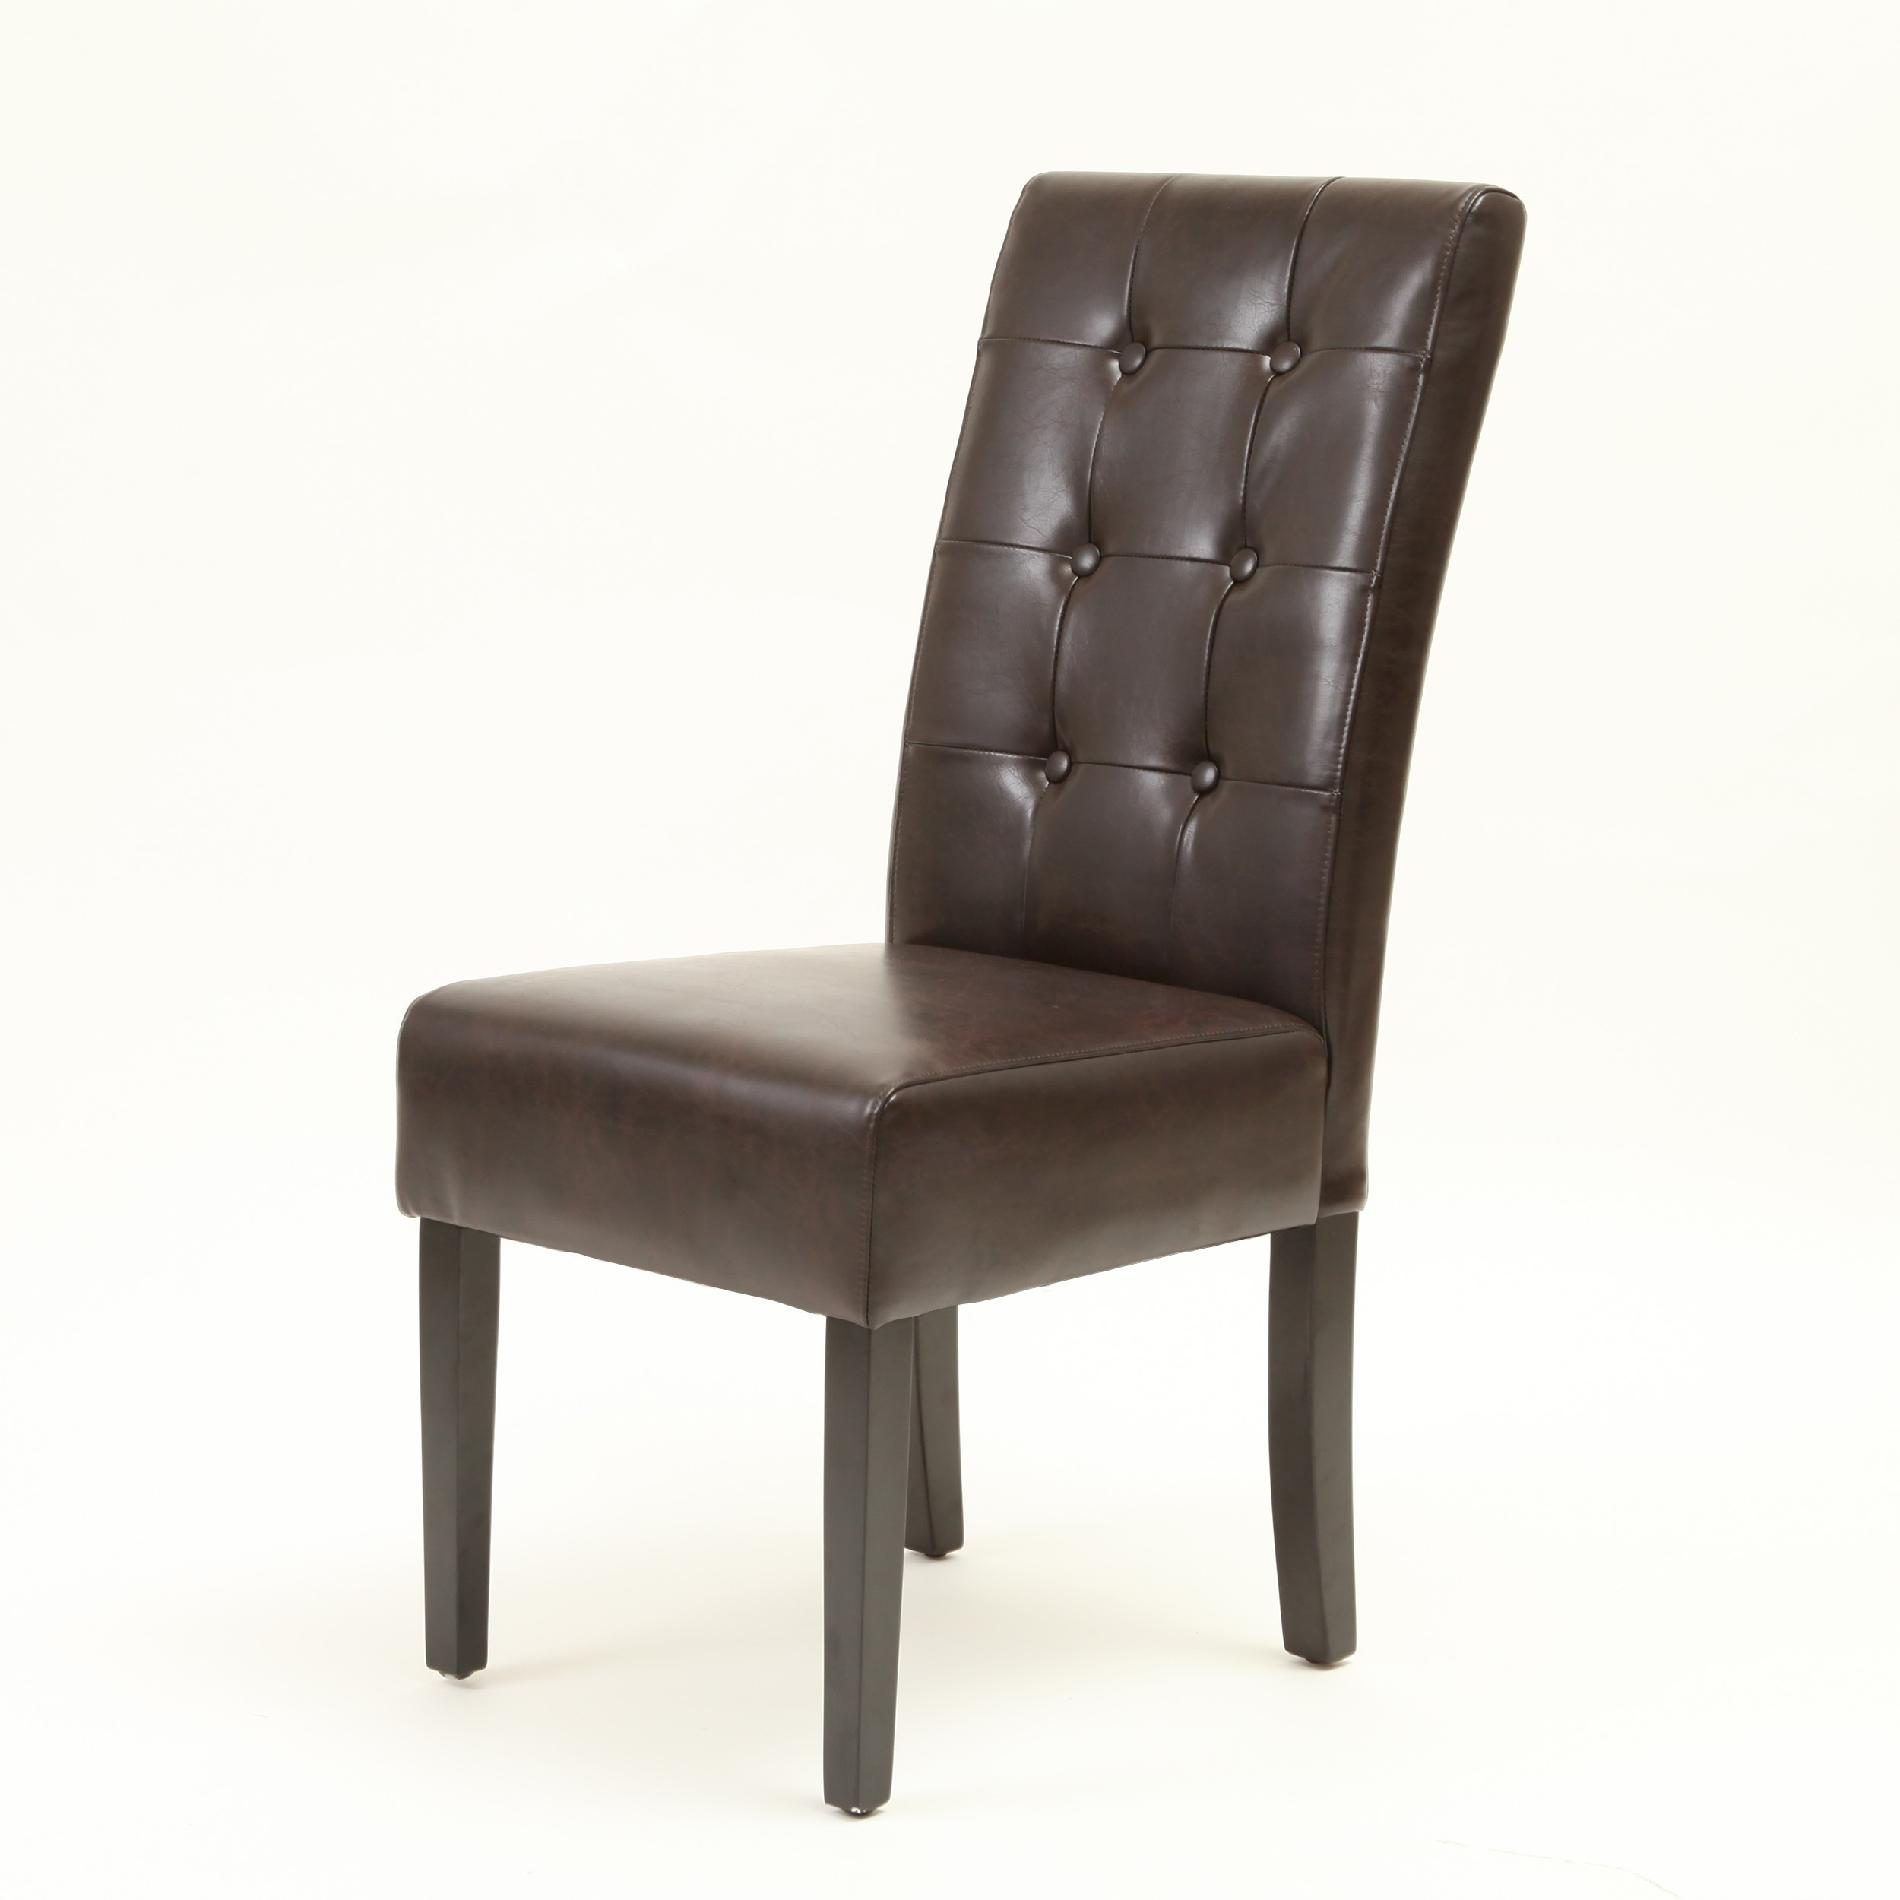 Alberta Tufted Espresso Leather Dining Chairs (Set OF 2)